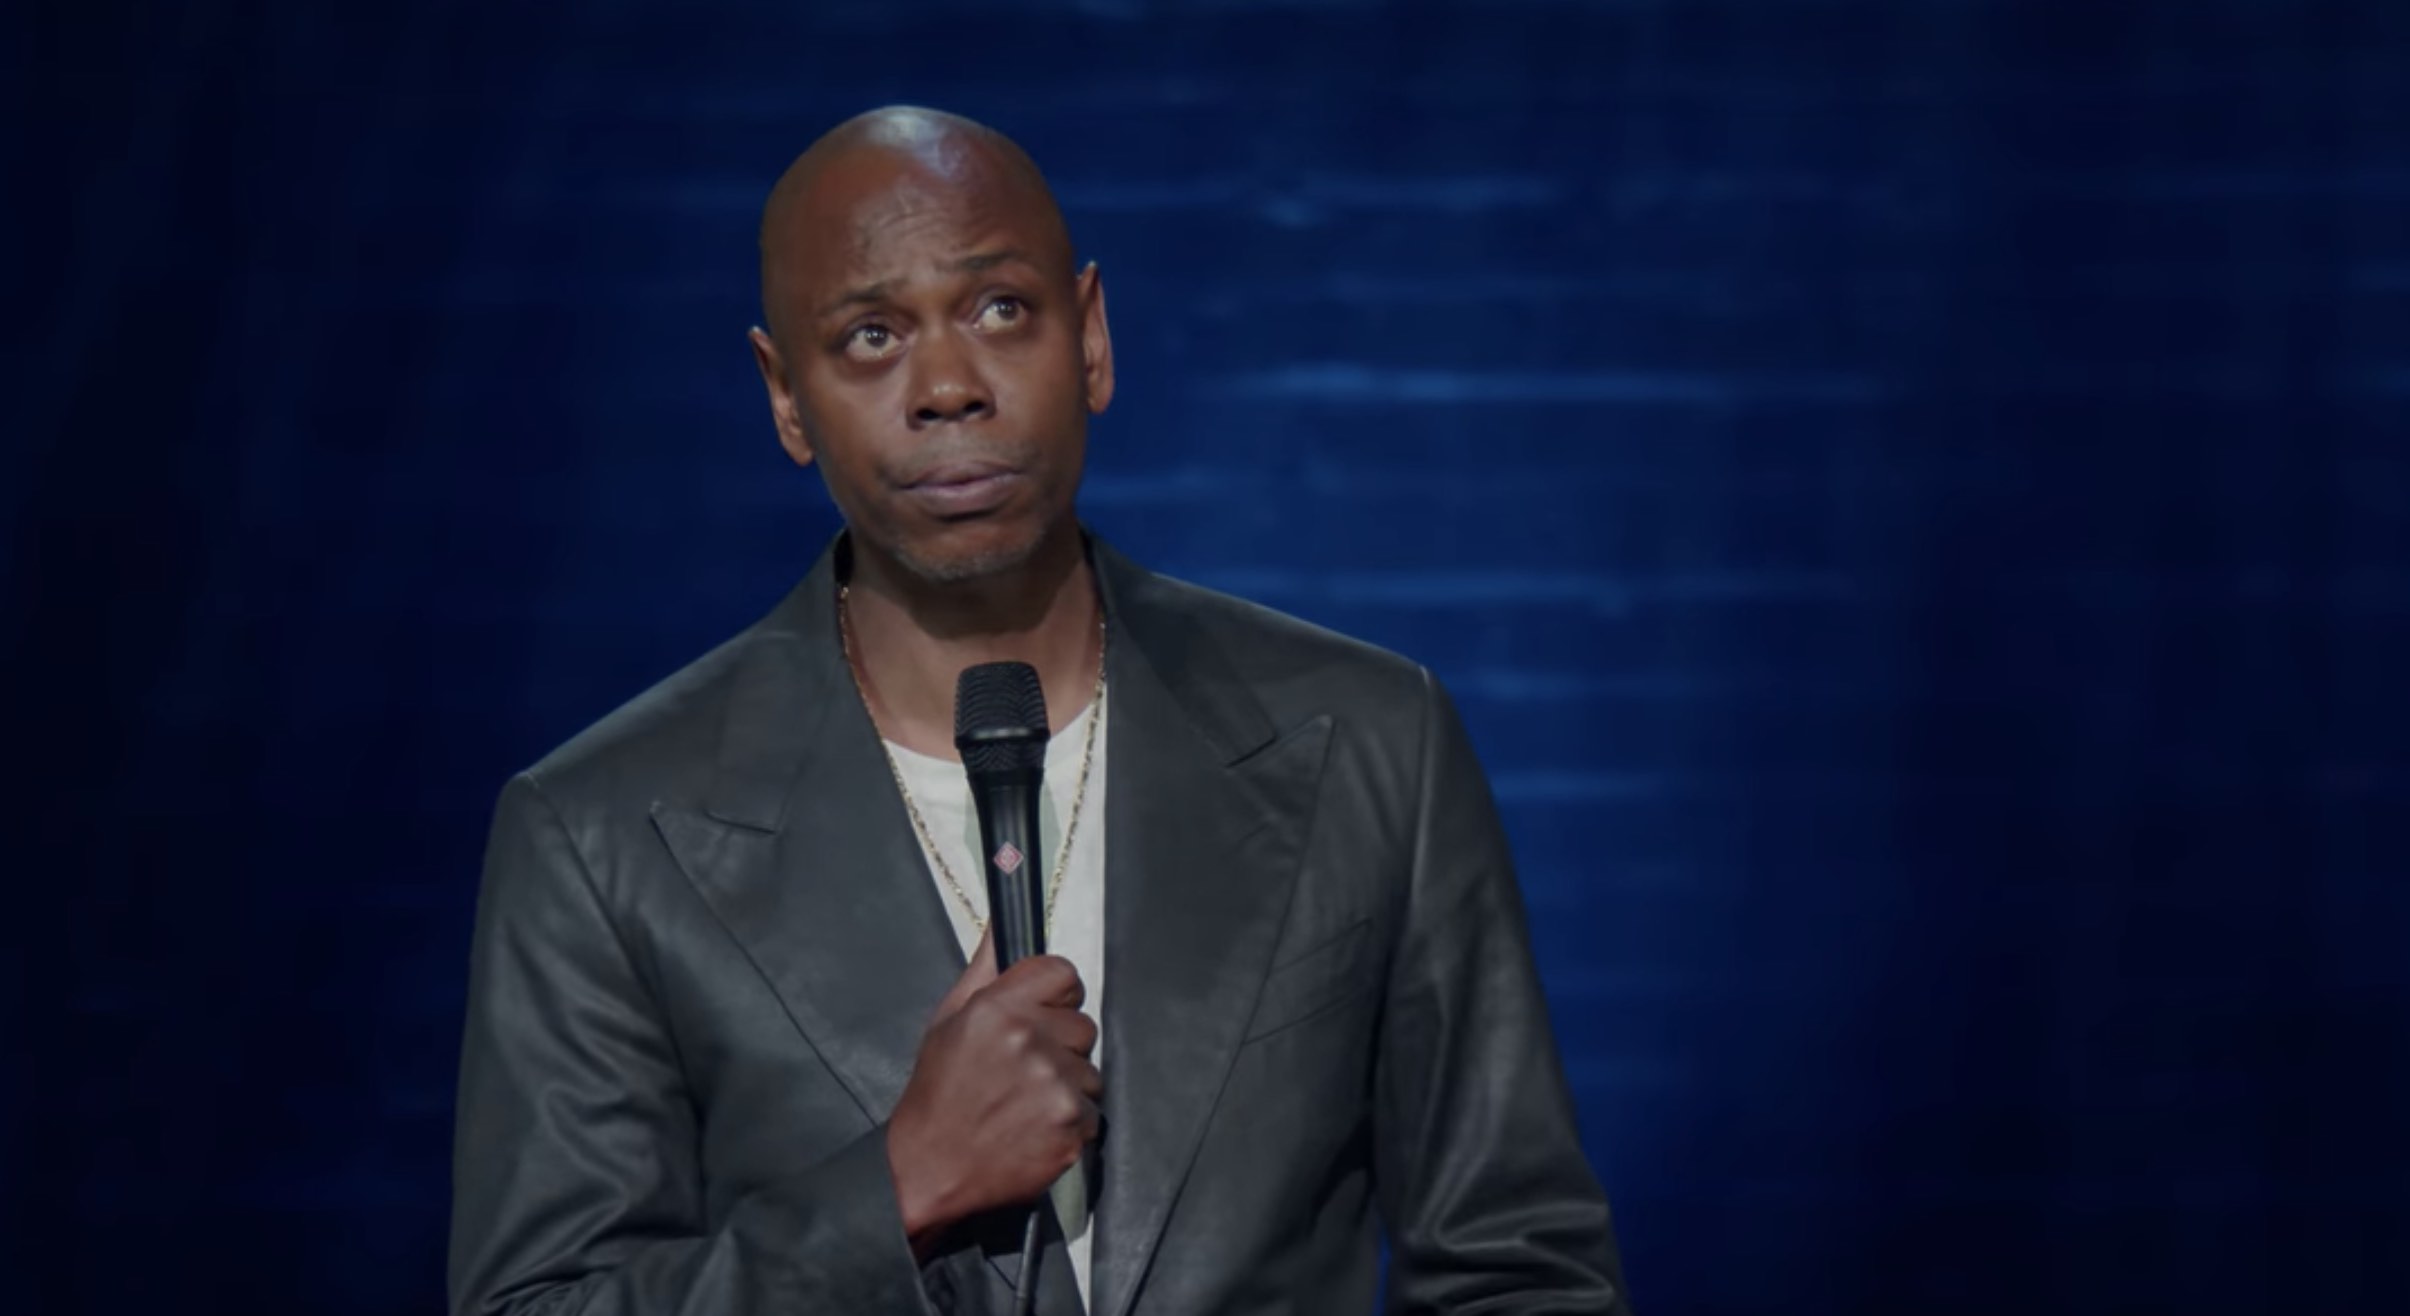 Review: Dave Chappelle's 'The Closer' Netflix Comedy Review